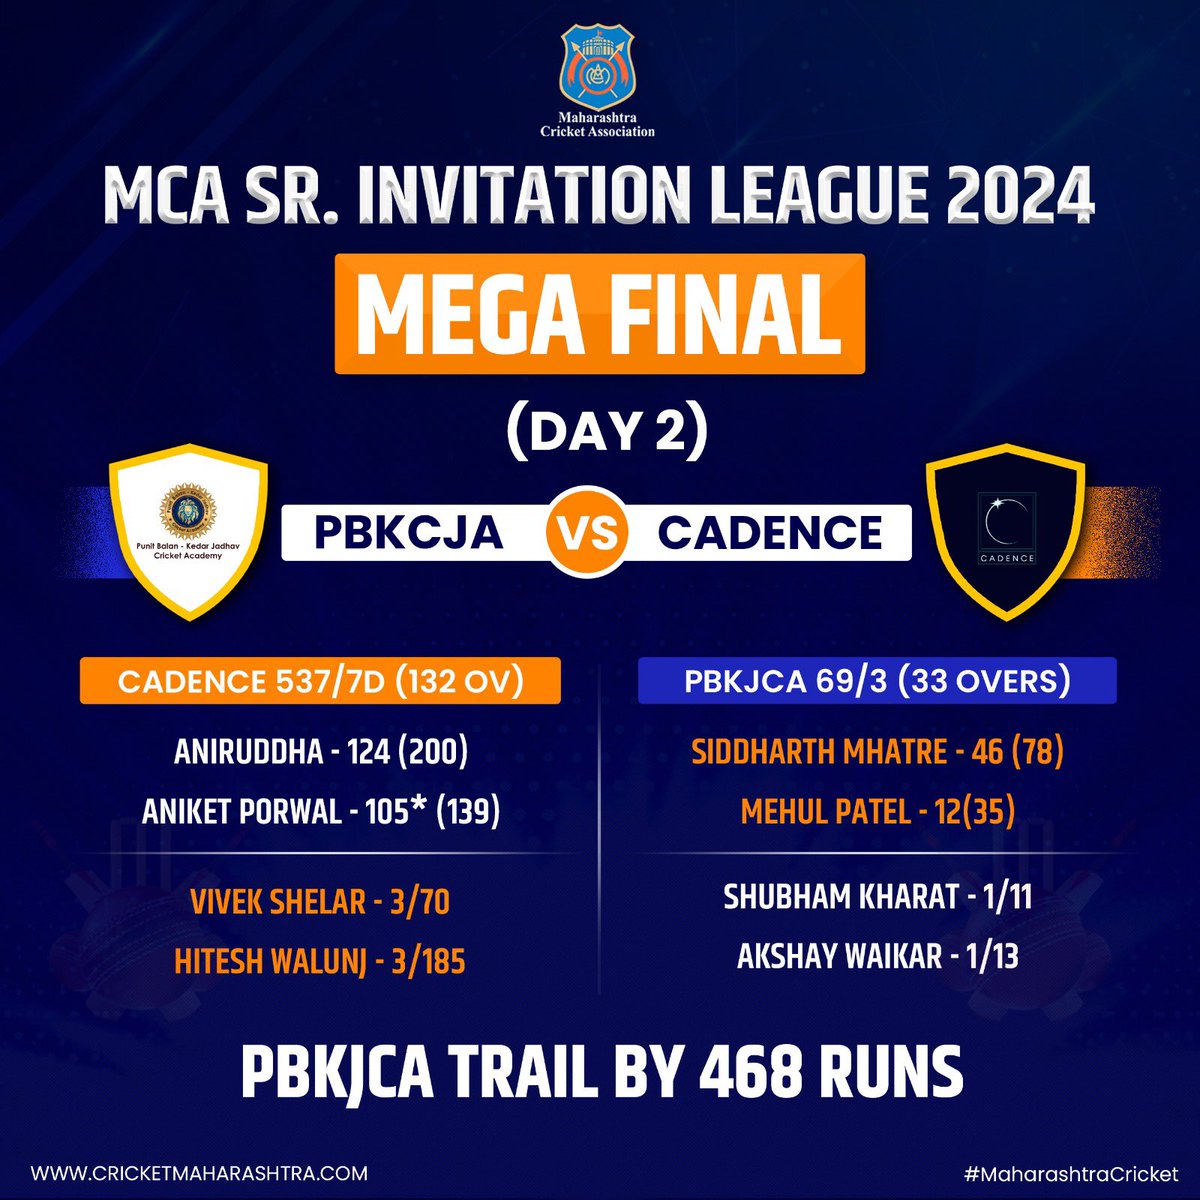 Cadence declared their innings on the Day 2 of the Final of MCA Senior Invitation League at 537/7d and put PBKJCA to bat. PBKJCA trail by 468 runs. #PBKJCA #MegaFinal #MCASeniorInvitationLeague #Cadence #MahaCricket #Cricket #MCA #MaharashtraCricket